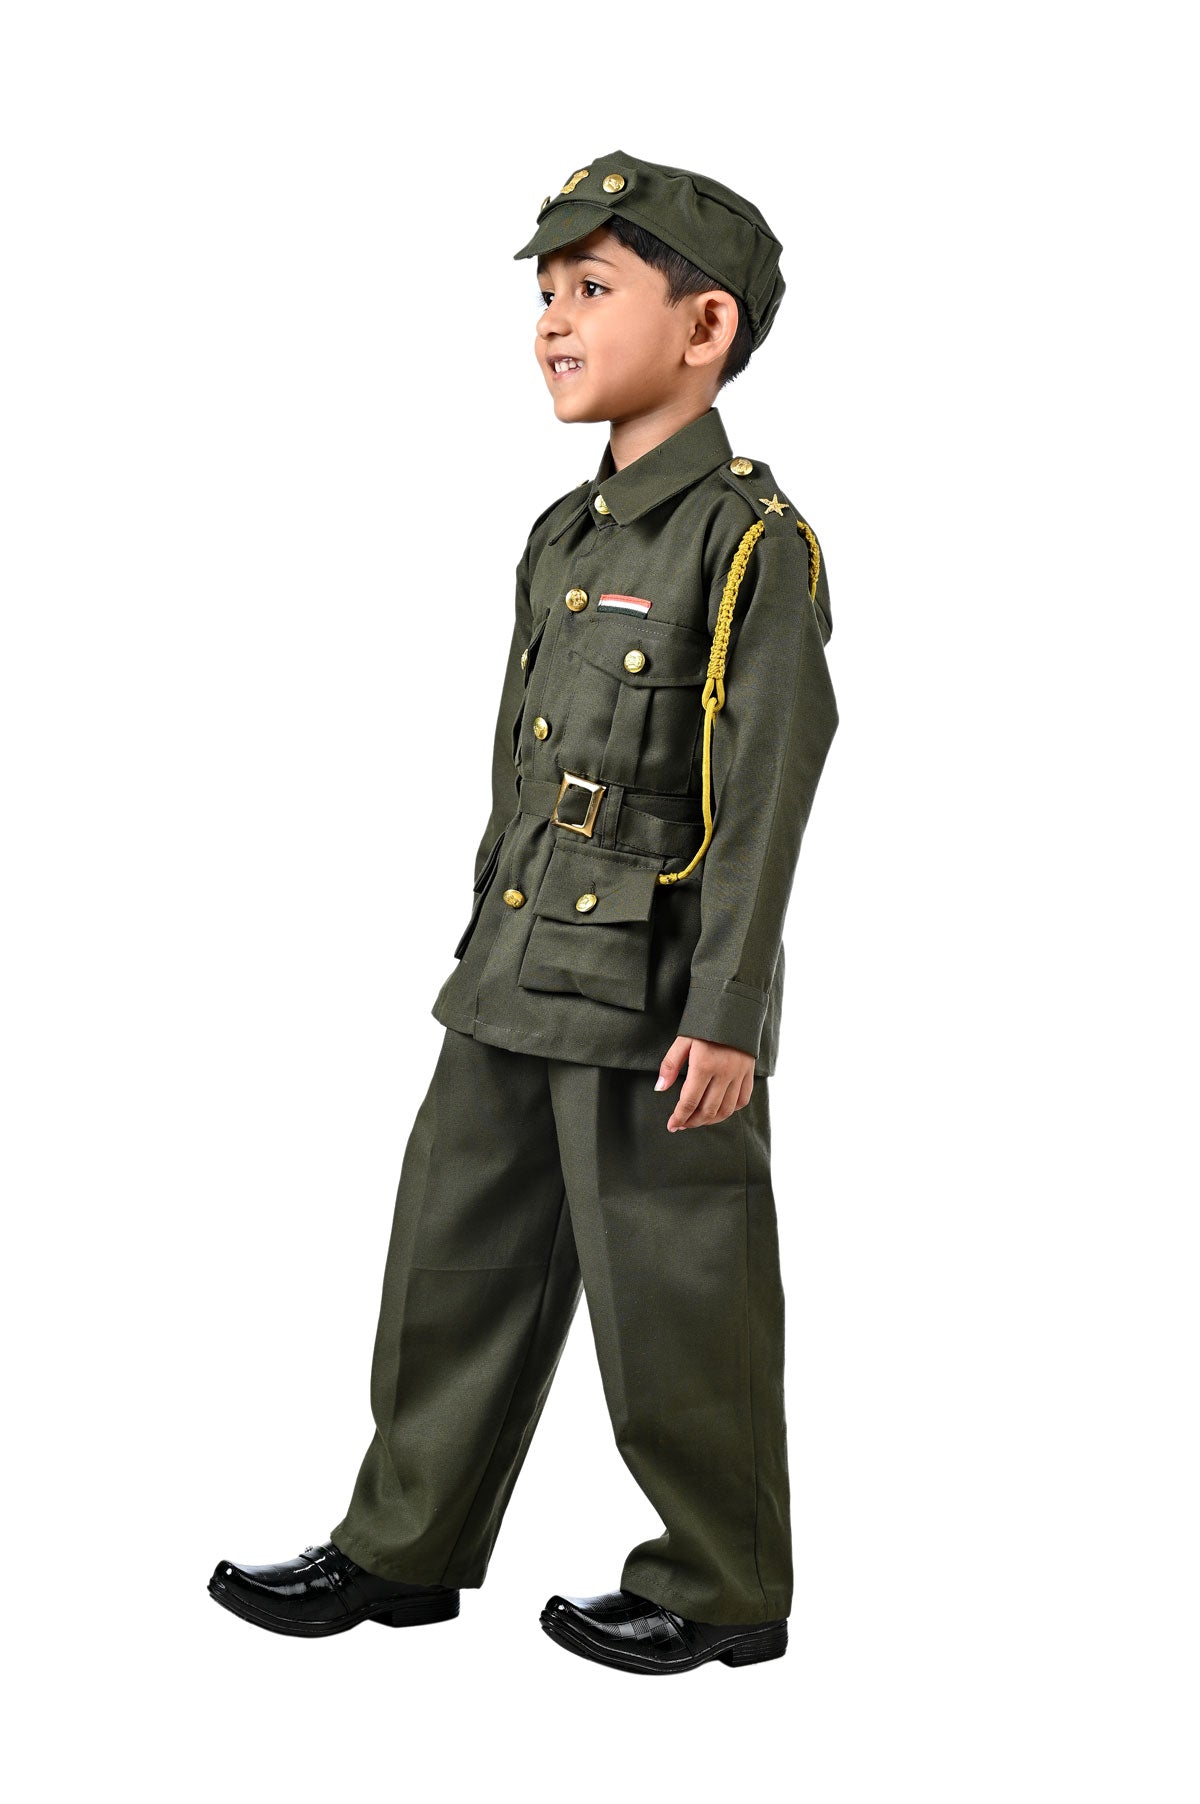 Buy BookMyCostume Indian Army General Profession Community Helper Kids  Fancy Dress Costume 11-12 years Online at Low Prices in India - Amazon.in